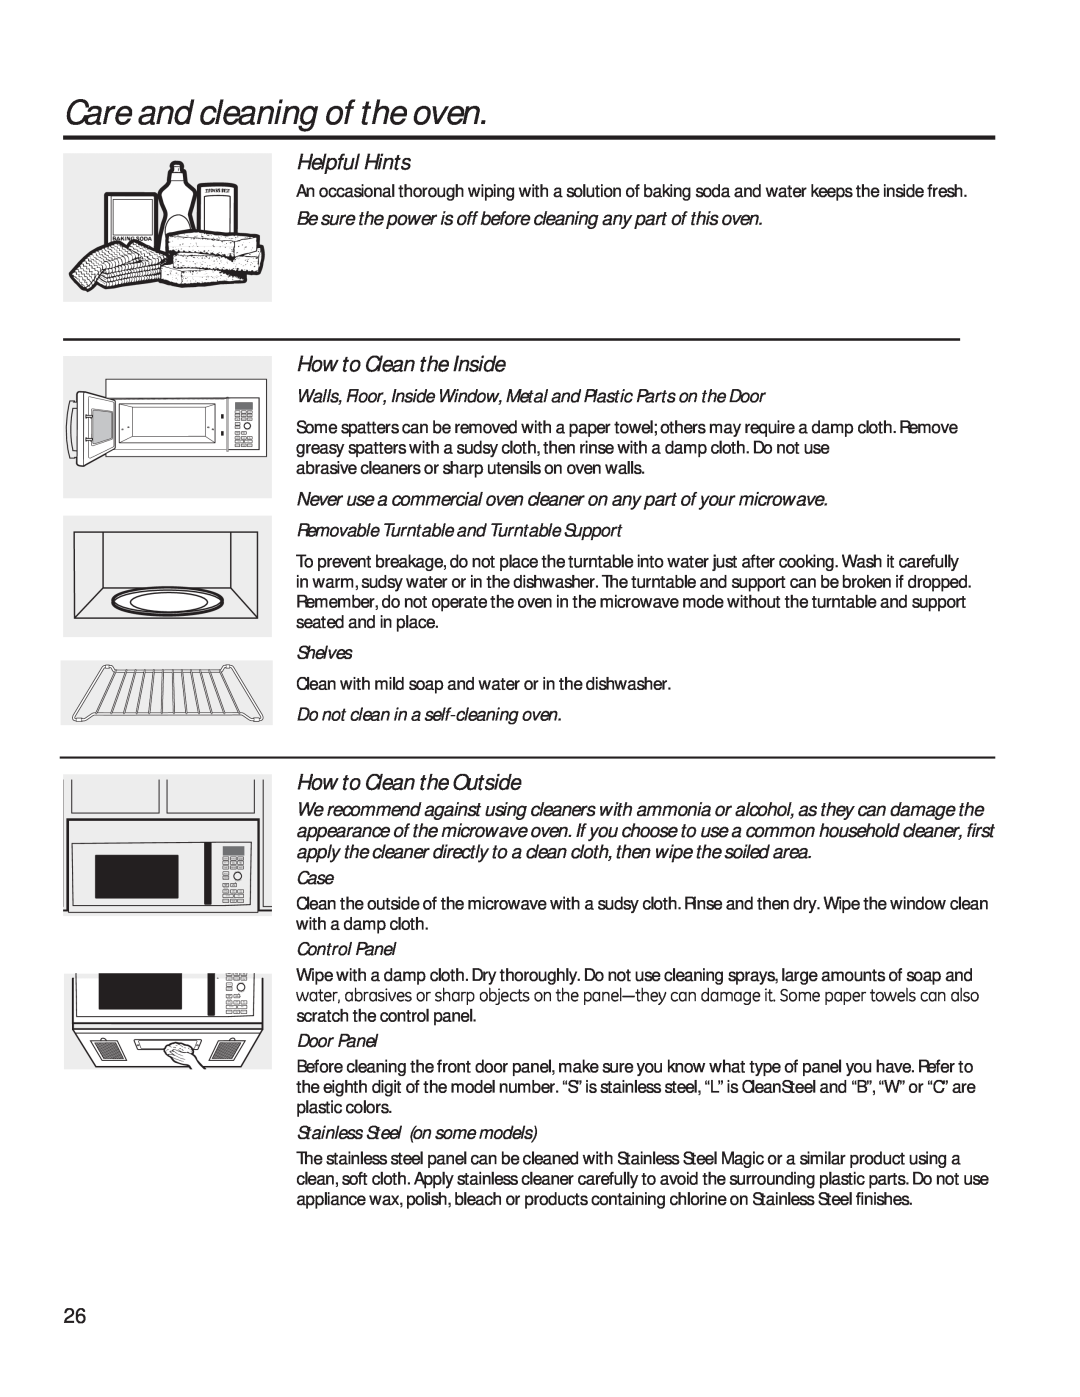 GE PVM9179 owner manual Care and cleaning of the oven, Helpful Hints, How to Clean the Inside, How to Clean the Outside 